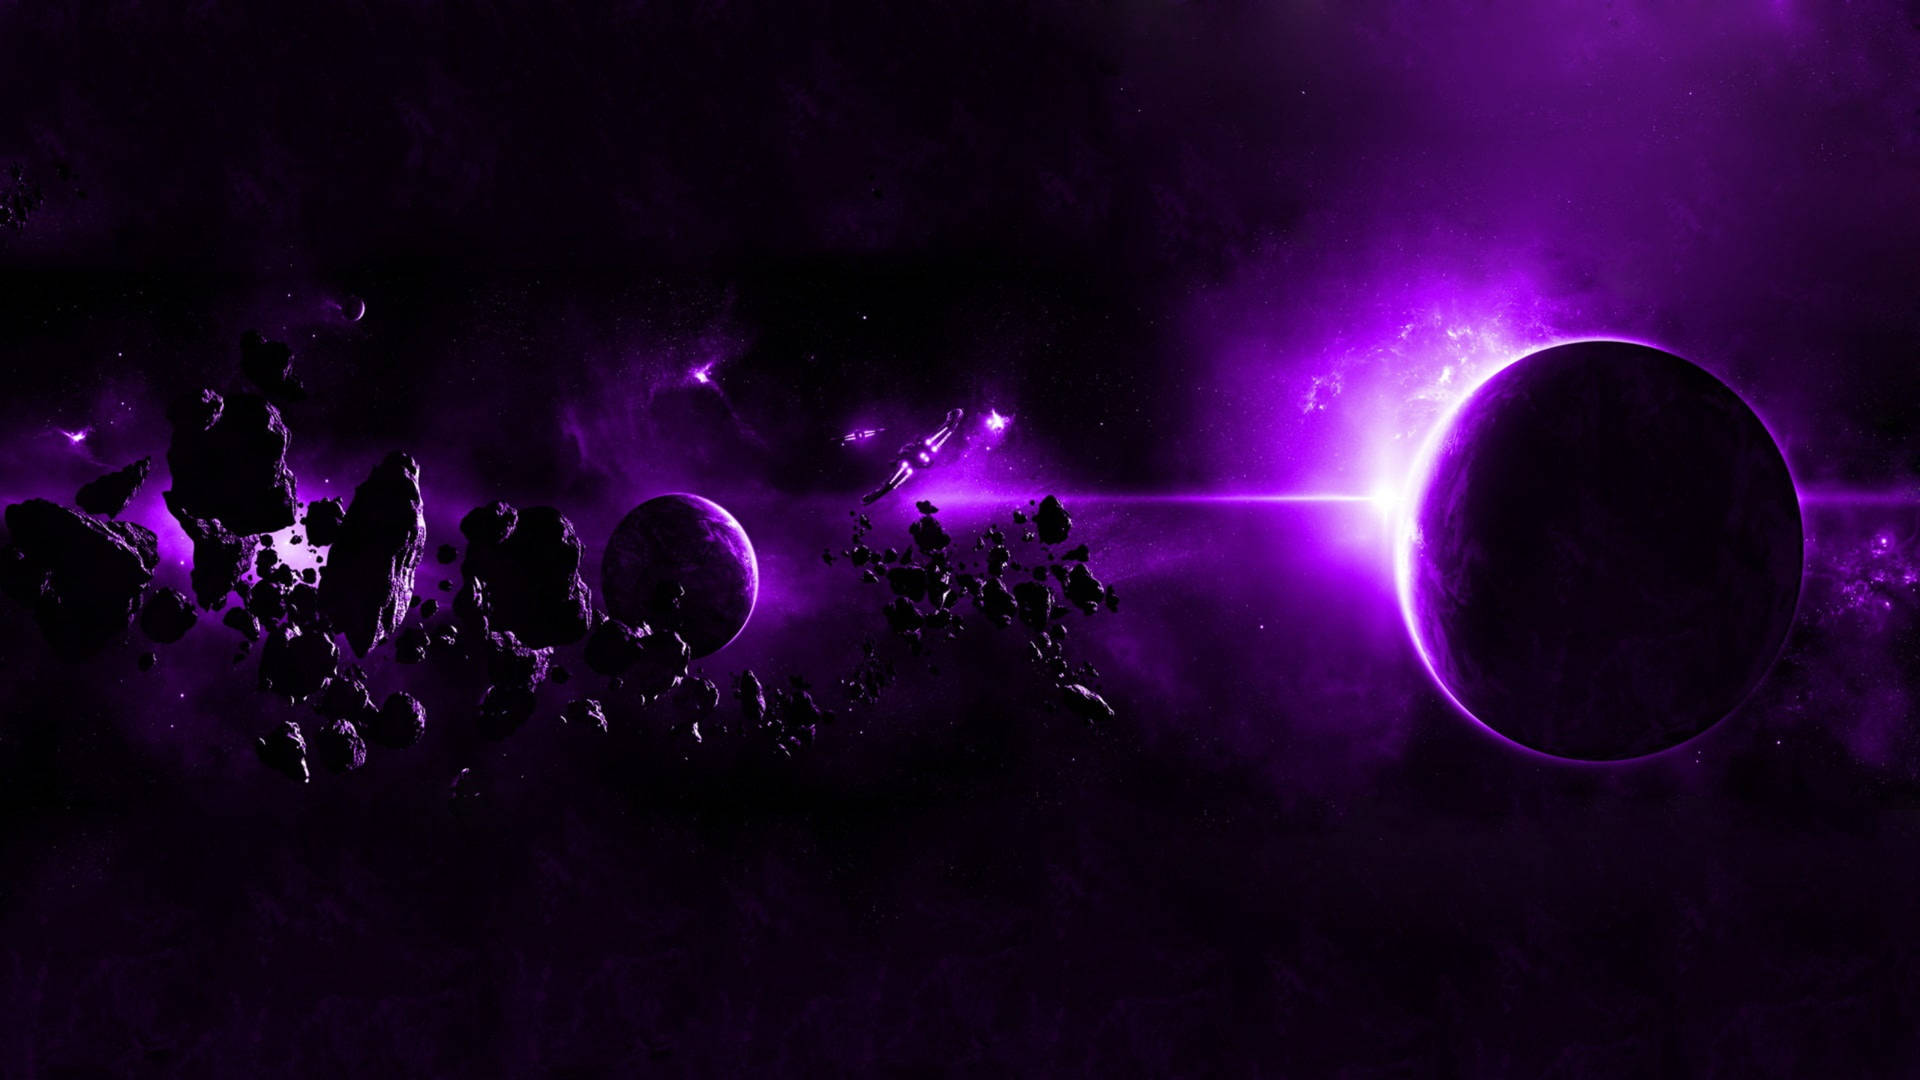 Dynamic Purple Space Planets Picture